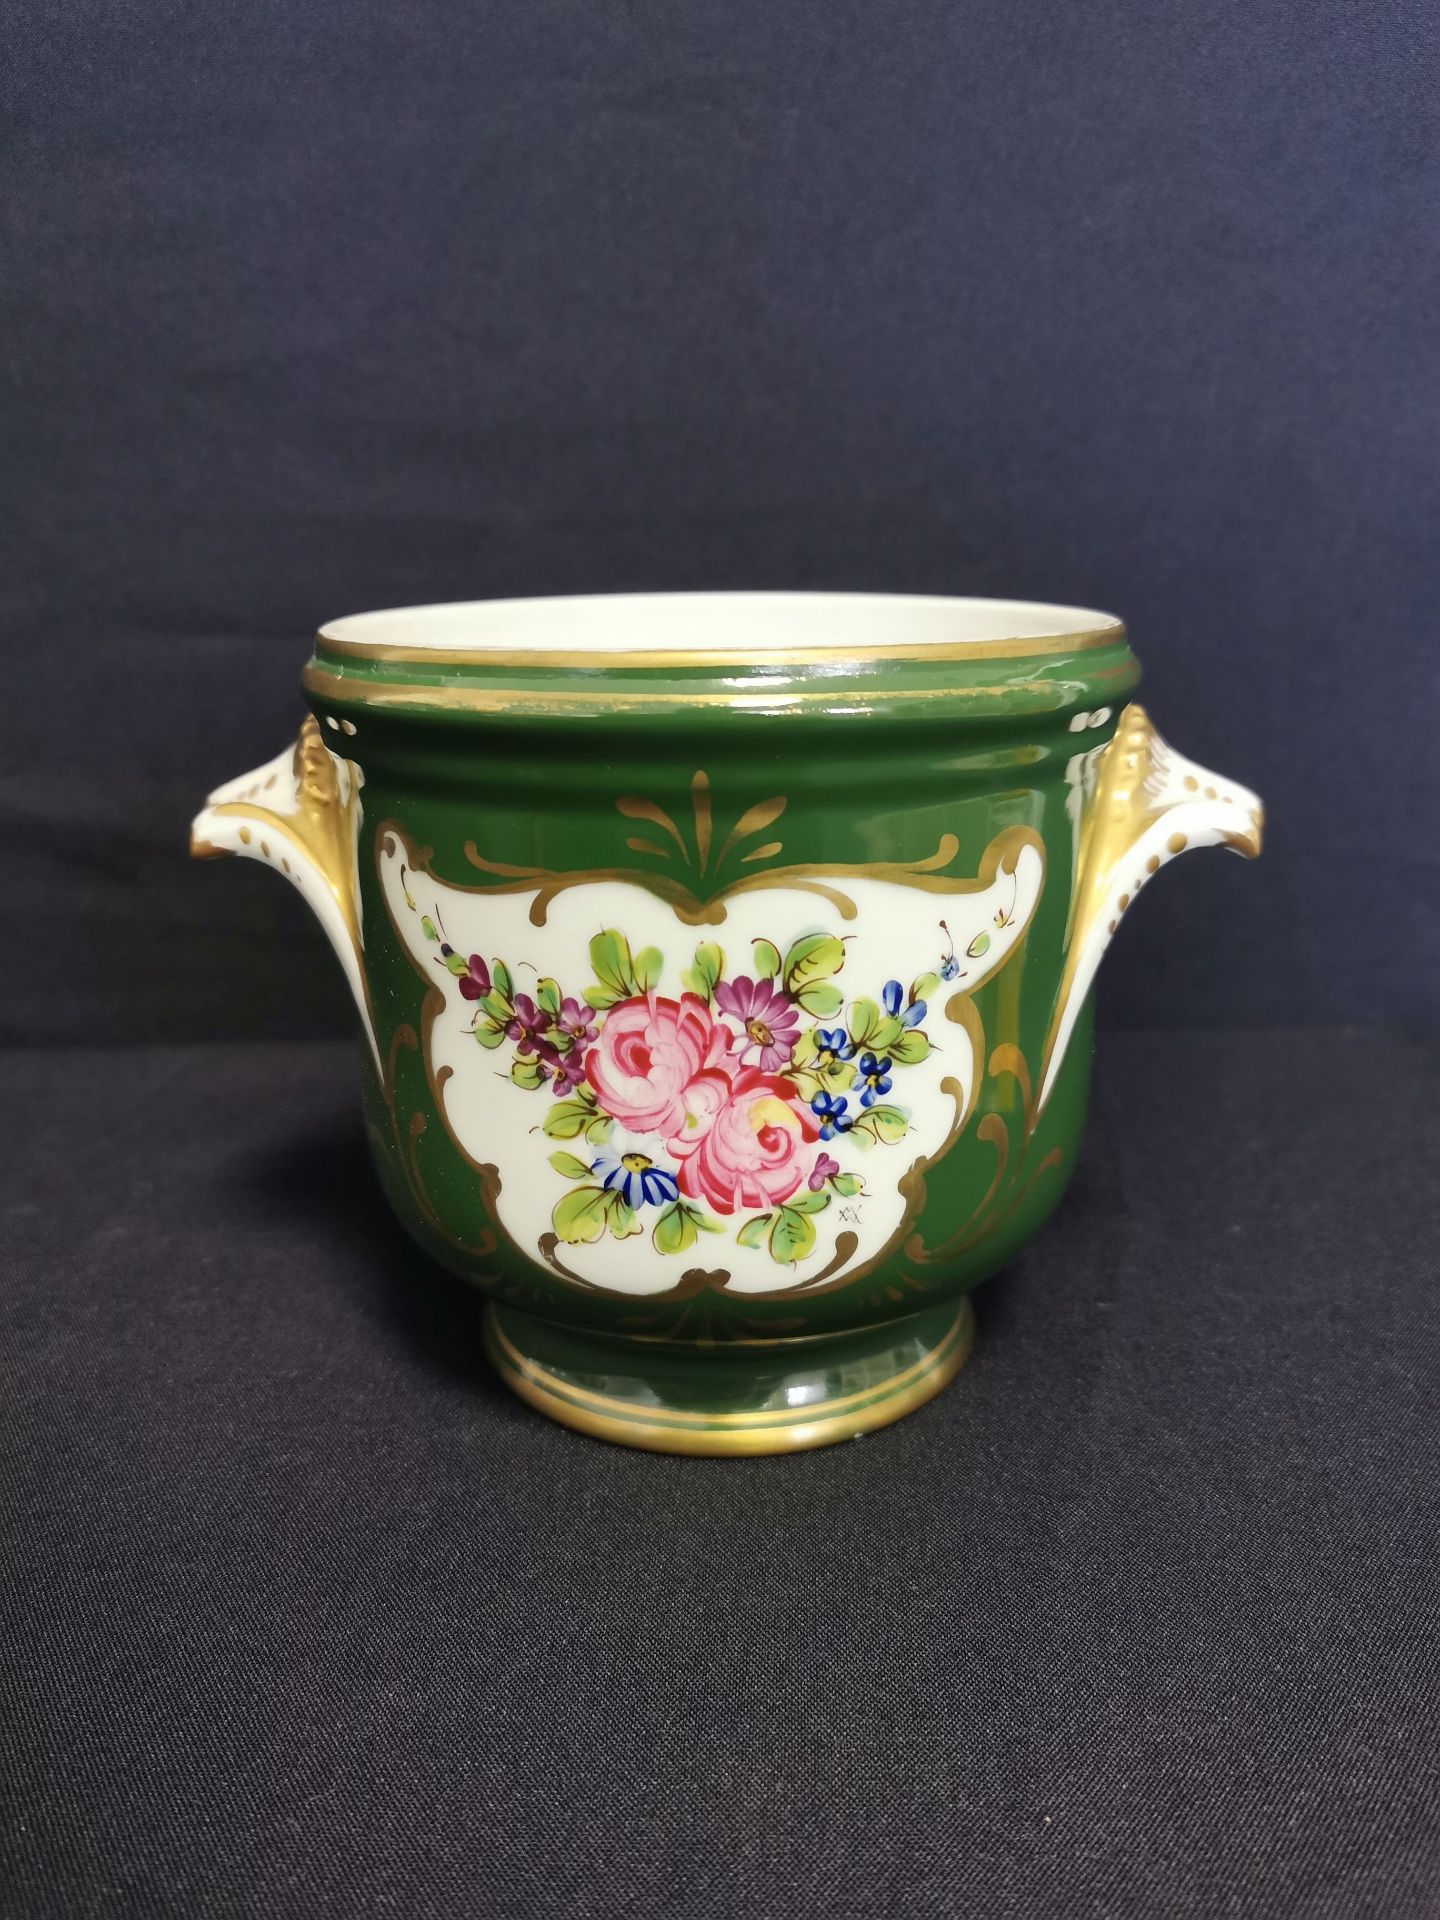 LIMOGES CACHEPOT - Image 2 of 5